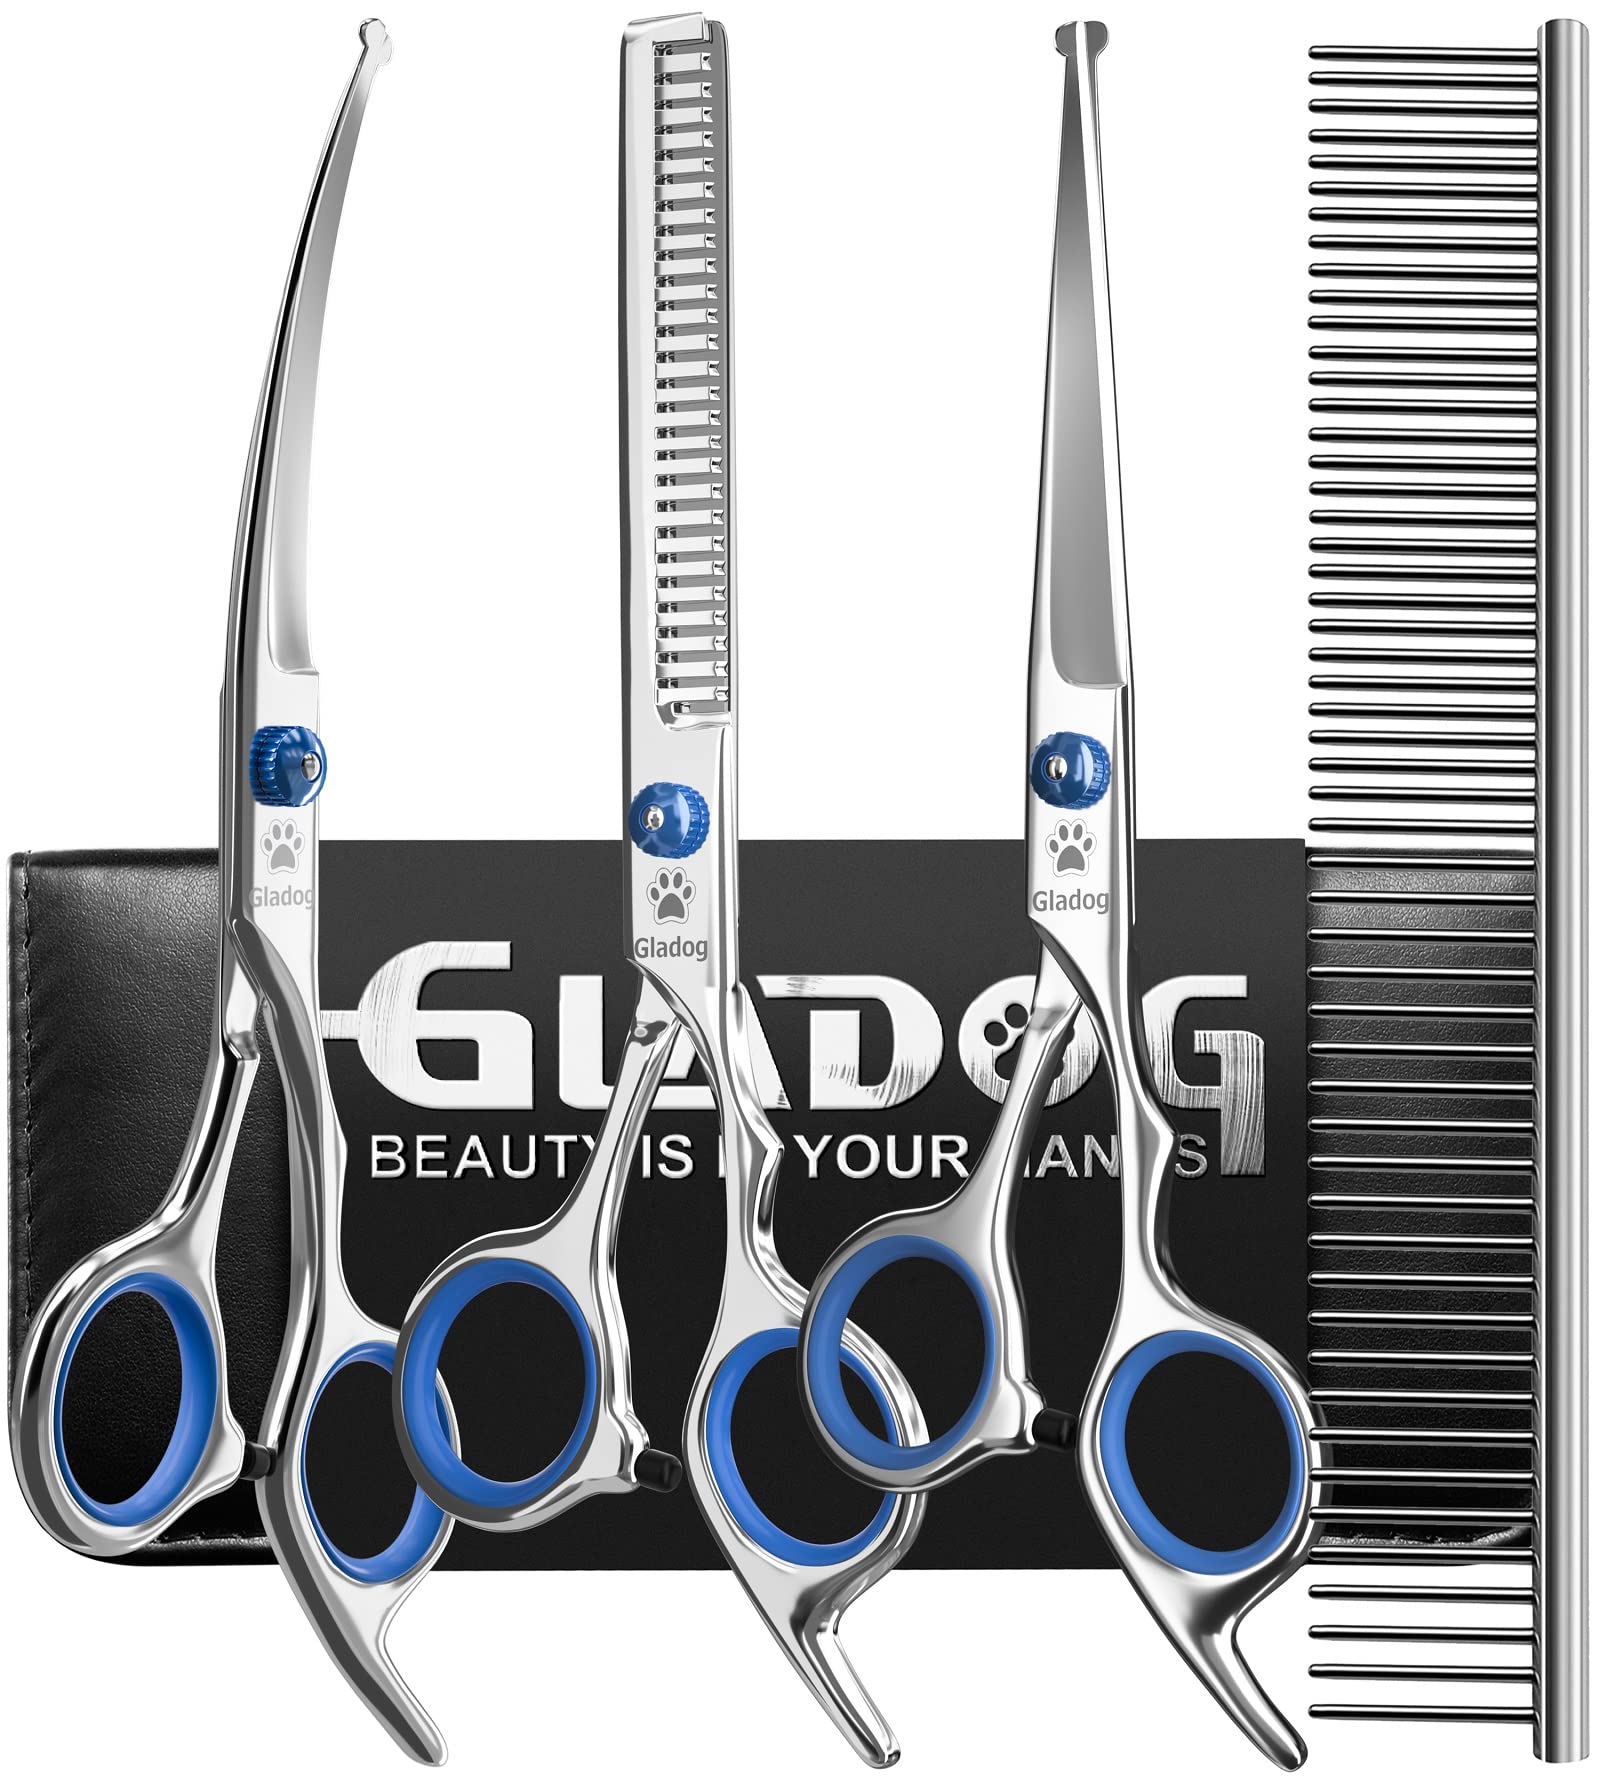 GLADOG Professional 5 in 1 Dog Grooming Scissors Set with Safety Round Tips, Sharp and Durable Pet Grooming Shears for Cats Blue 5 in 1